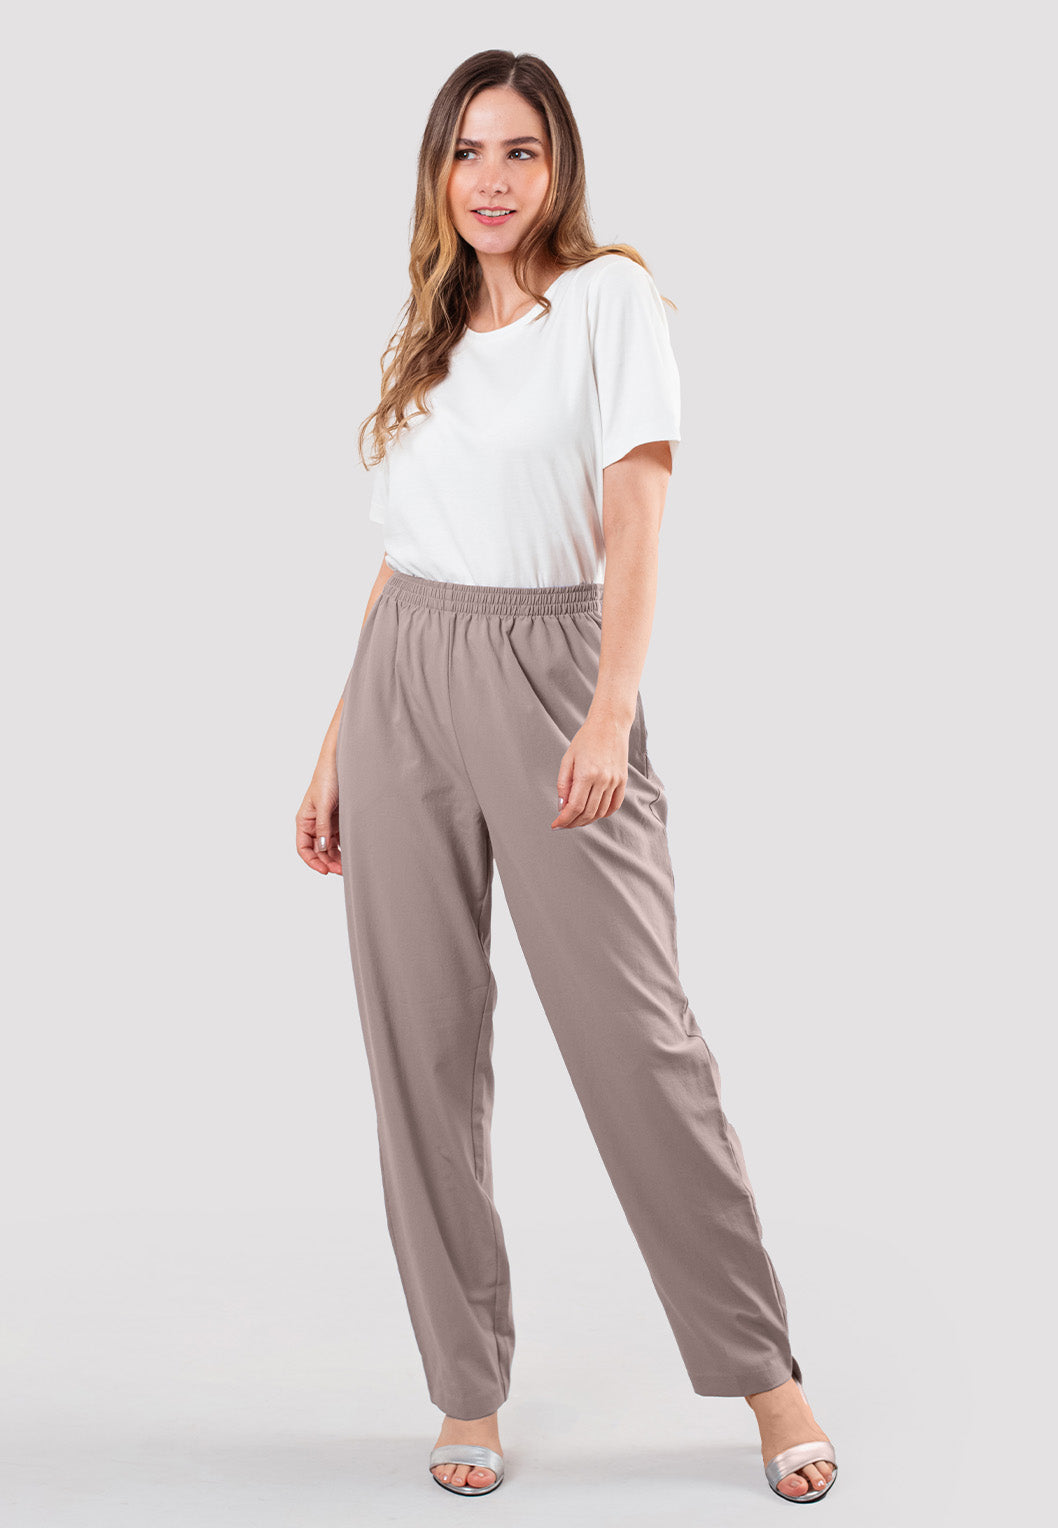 Pull On Lechute Pant - Sand